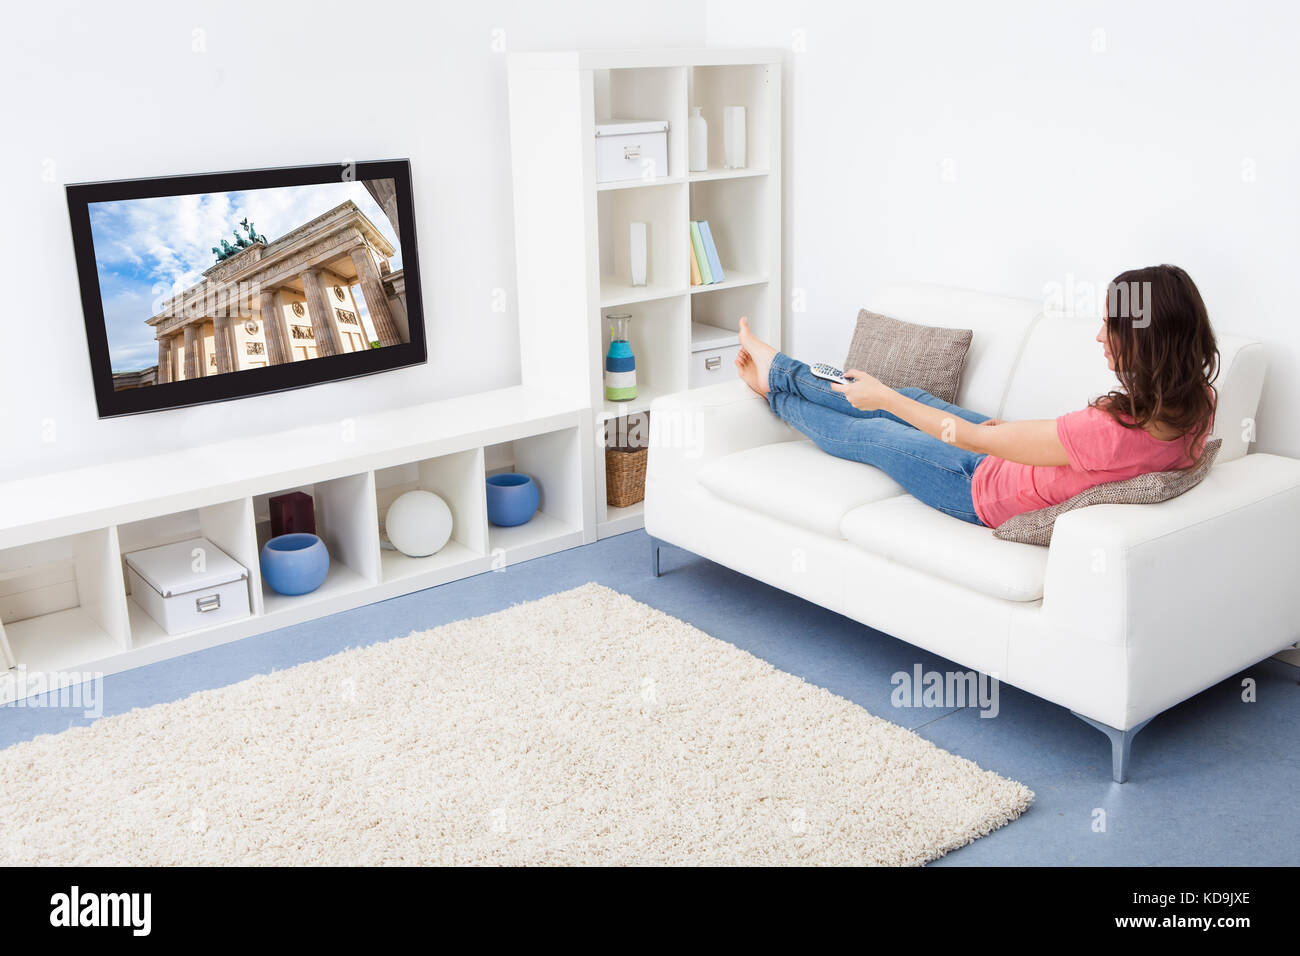 Portrait Of Smiling Woman Sitting On Couch Watching Television Stock Photo